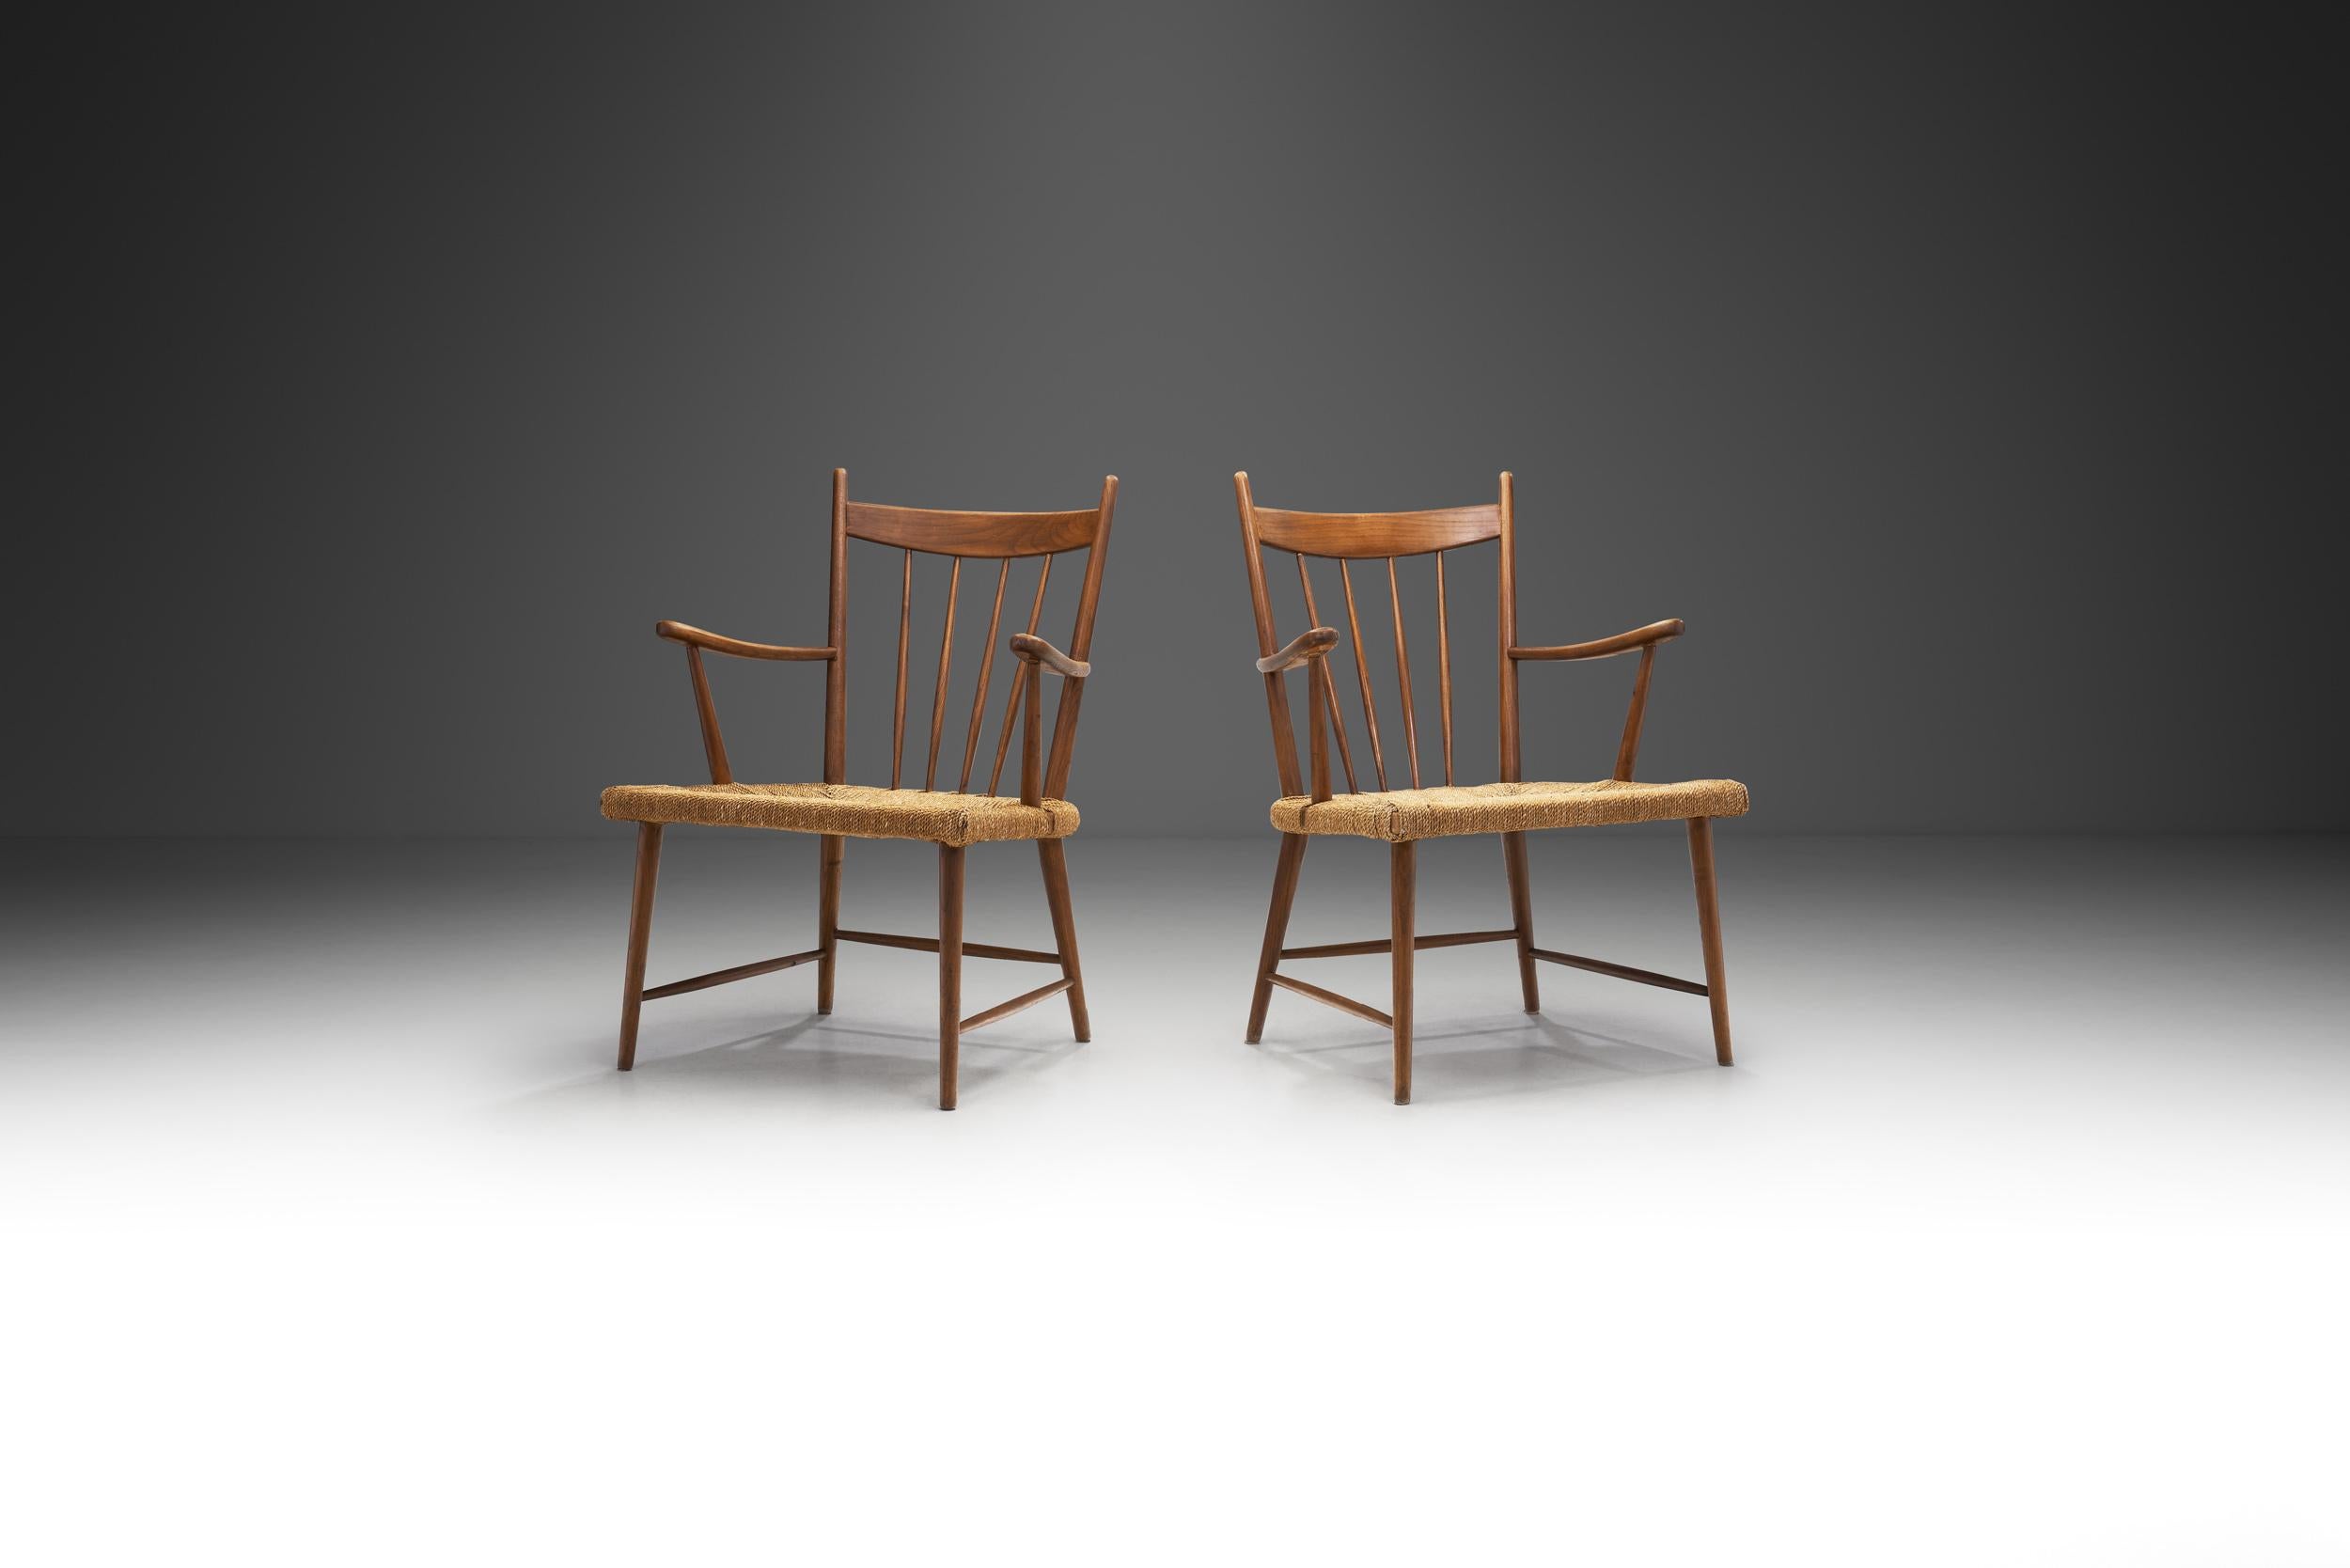 The designs of most of Danish mid-century modern furniture designers and architects aimed at functionality, an equally minimalist and appealing appearance and easy accessibility. This pair of slatback chairs with woven Danish paper cord seats is